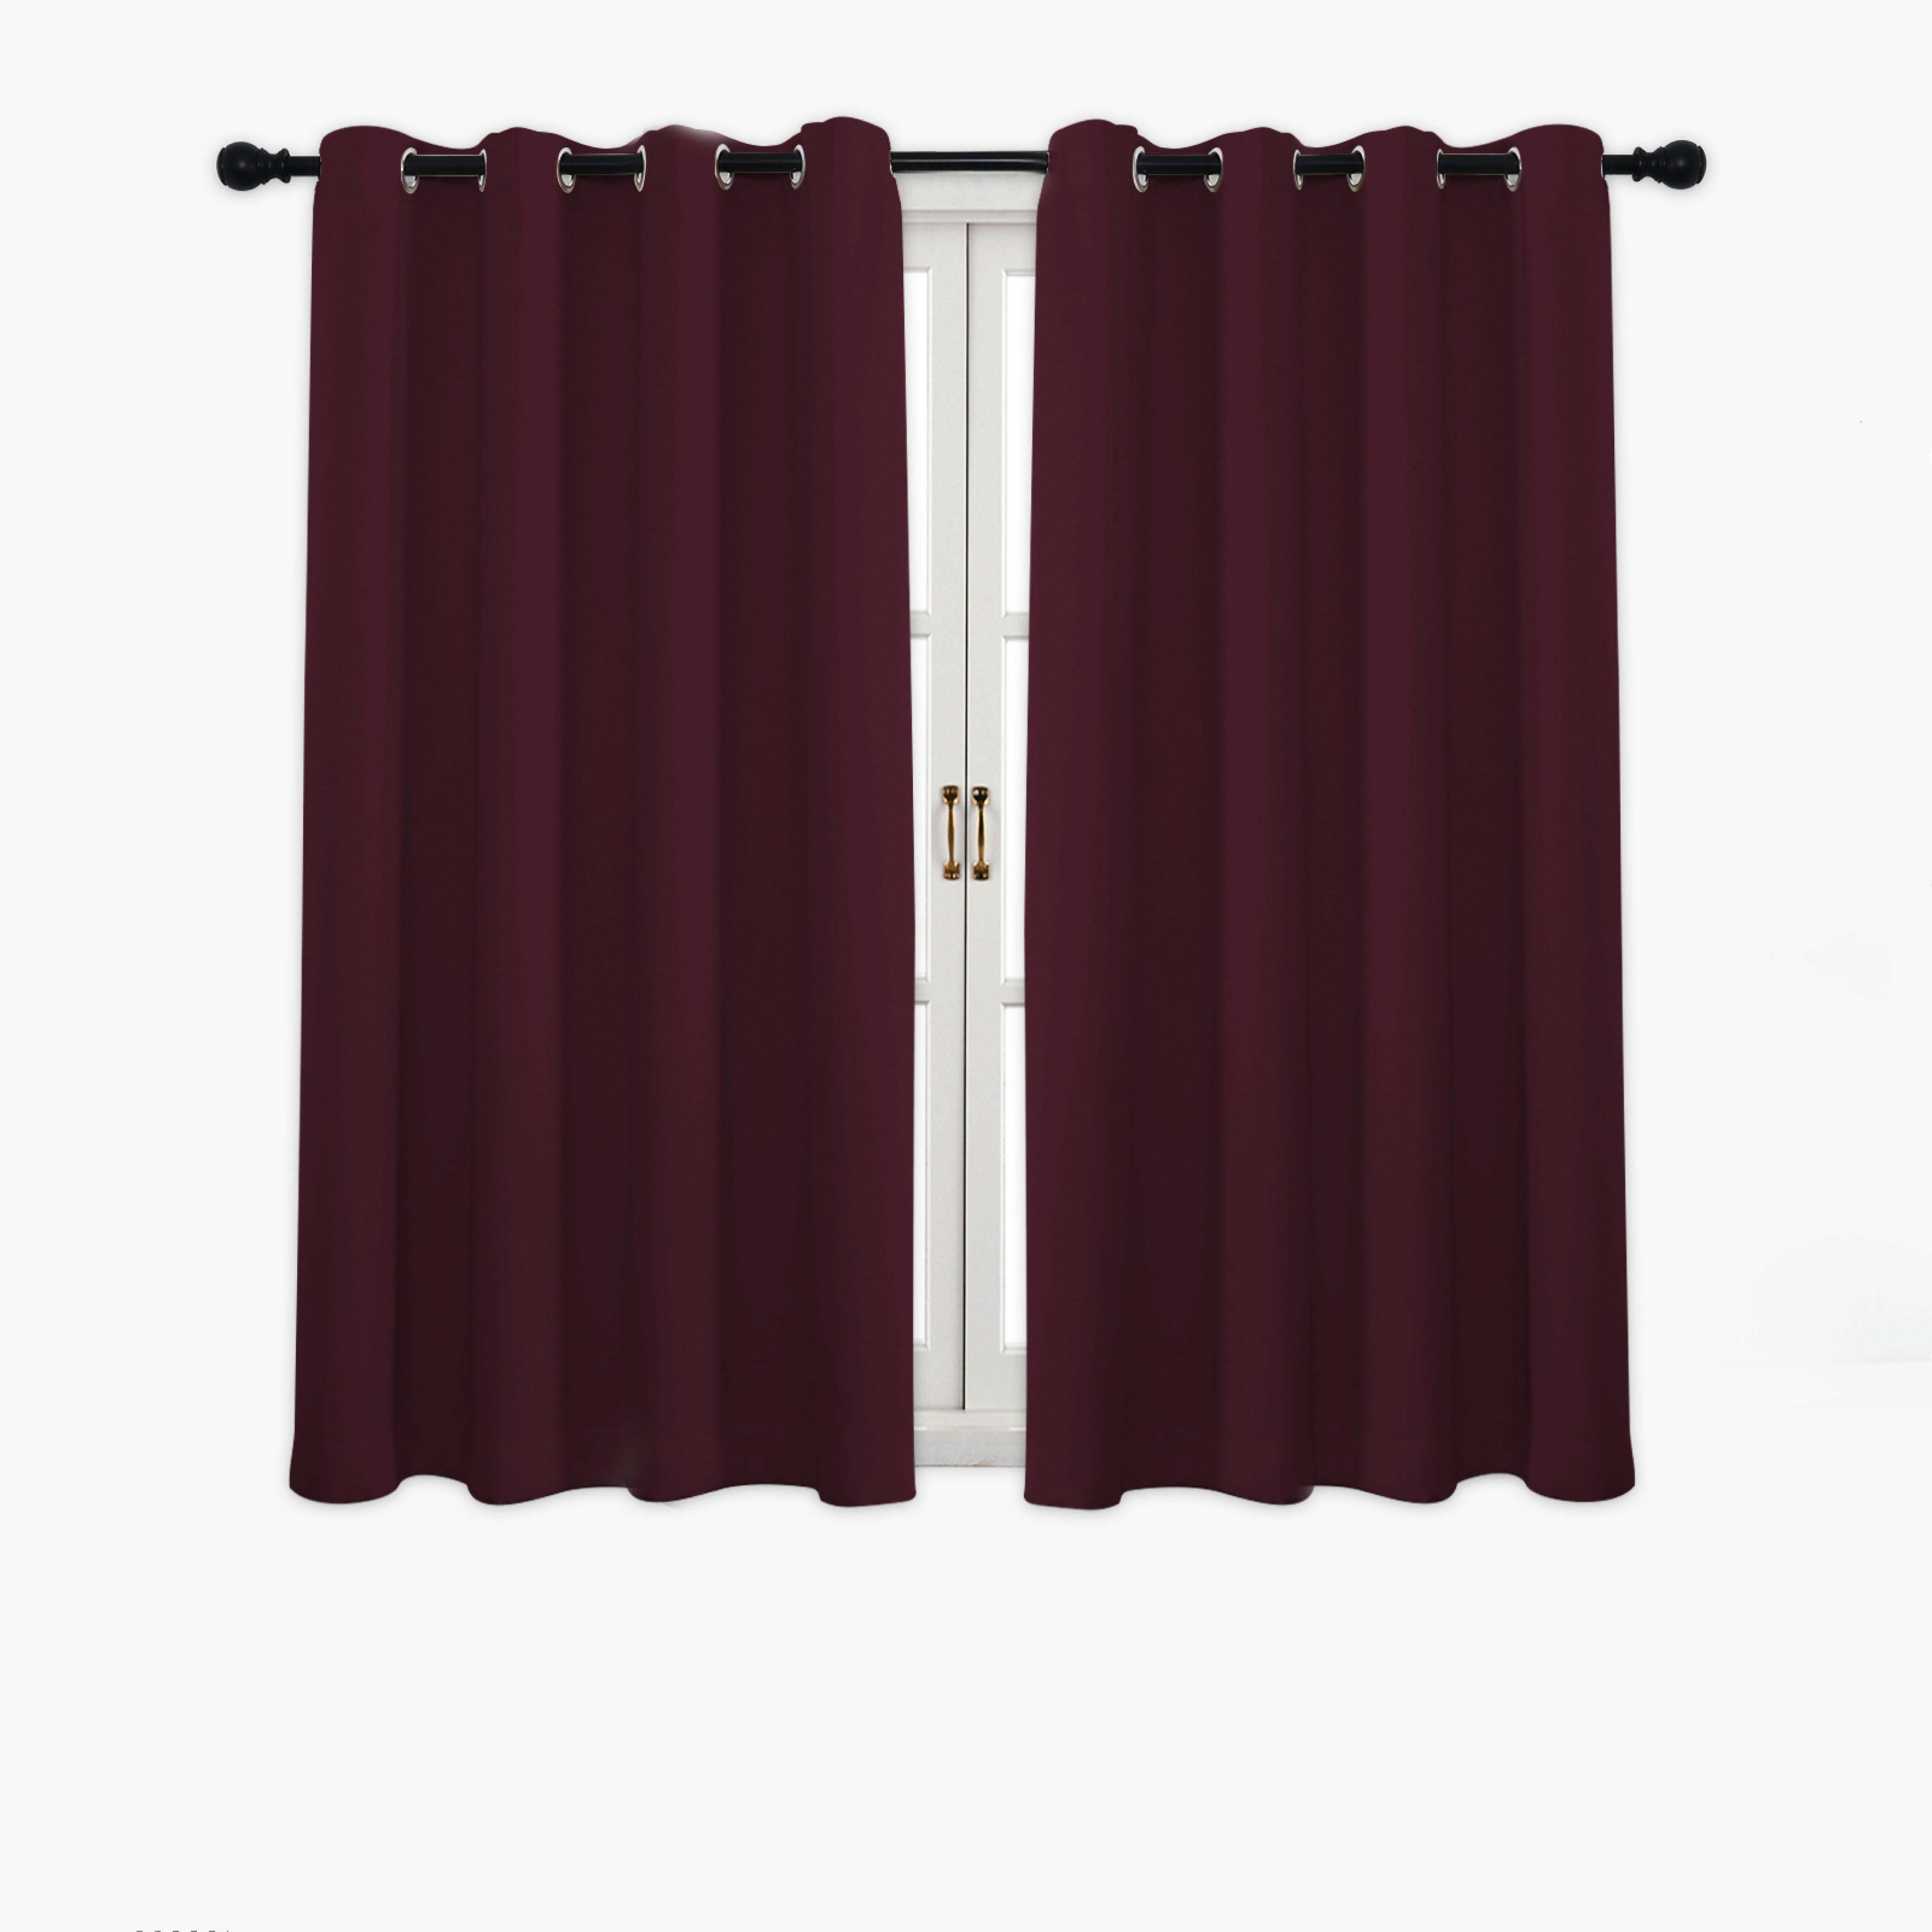 Hyper Cover 3-Layers Blockout Curtains Burgundy | Window Curtains | Brilliant Home Living